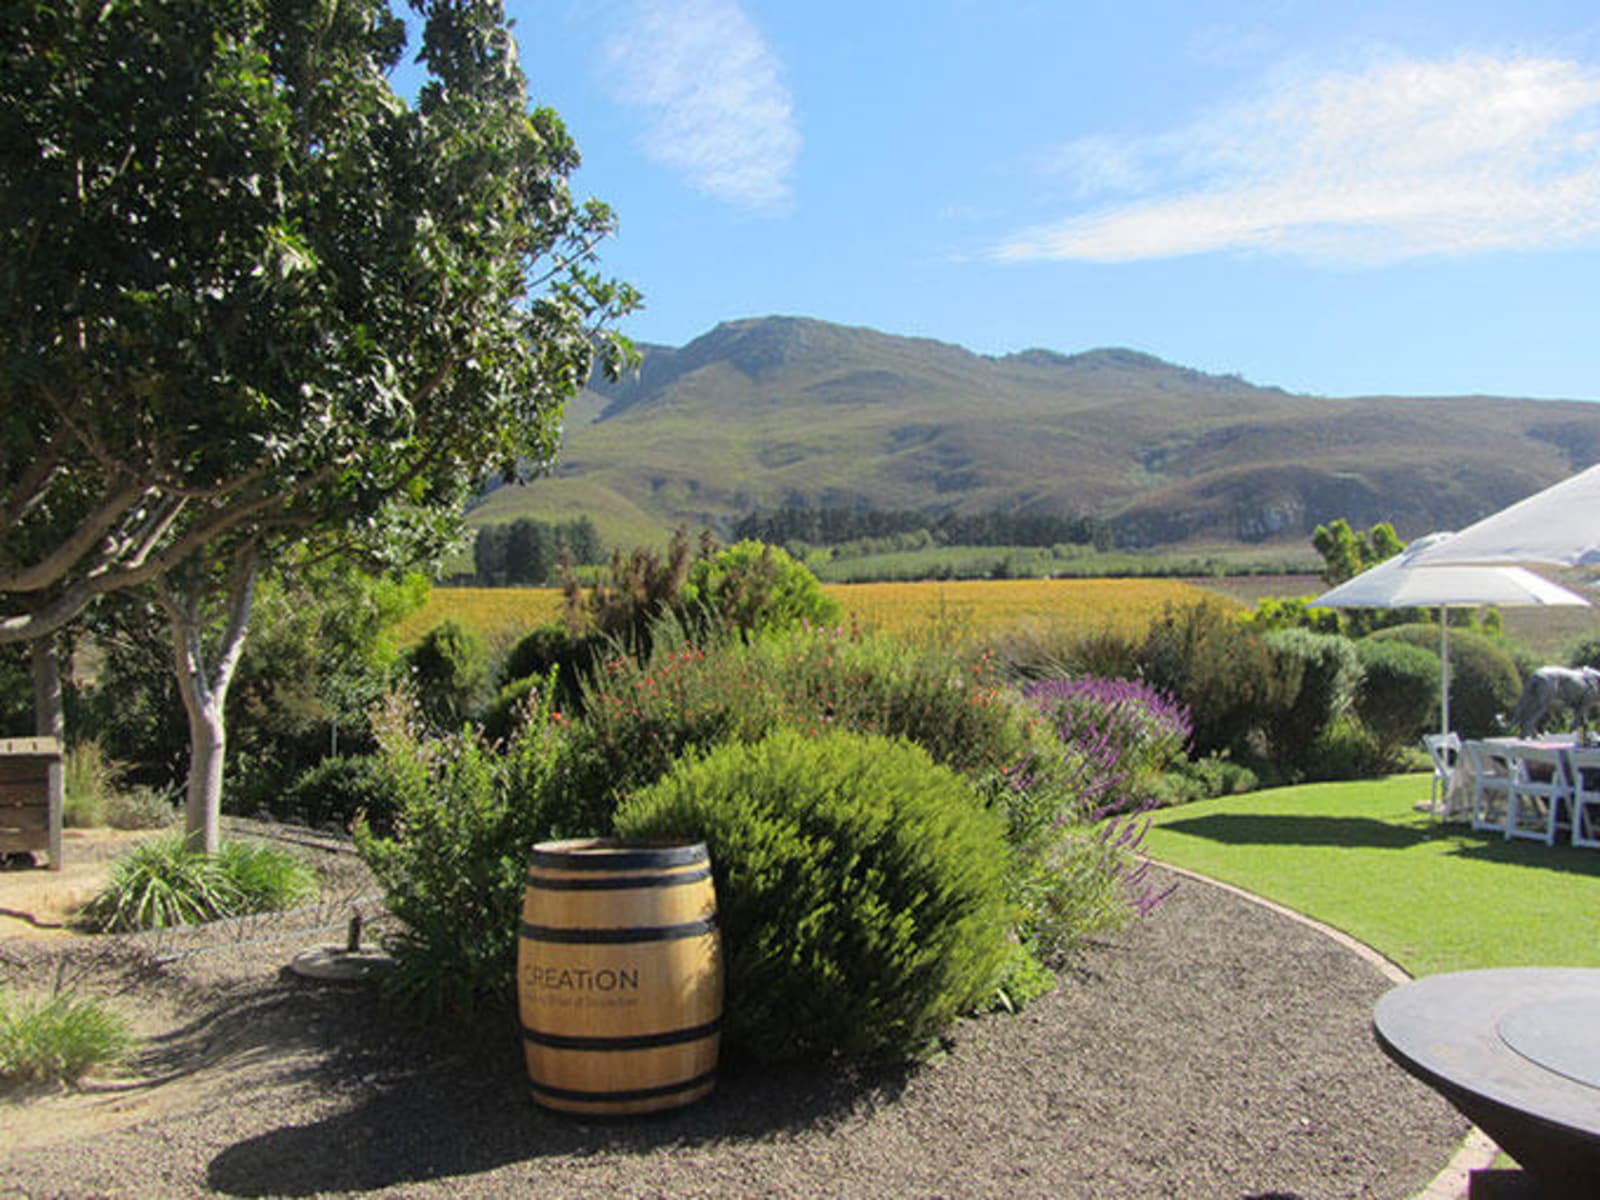 Barrel of wine in a garden overlooking clear mountain views